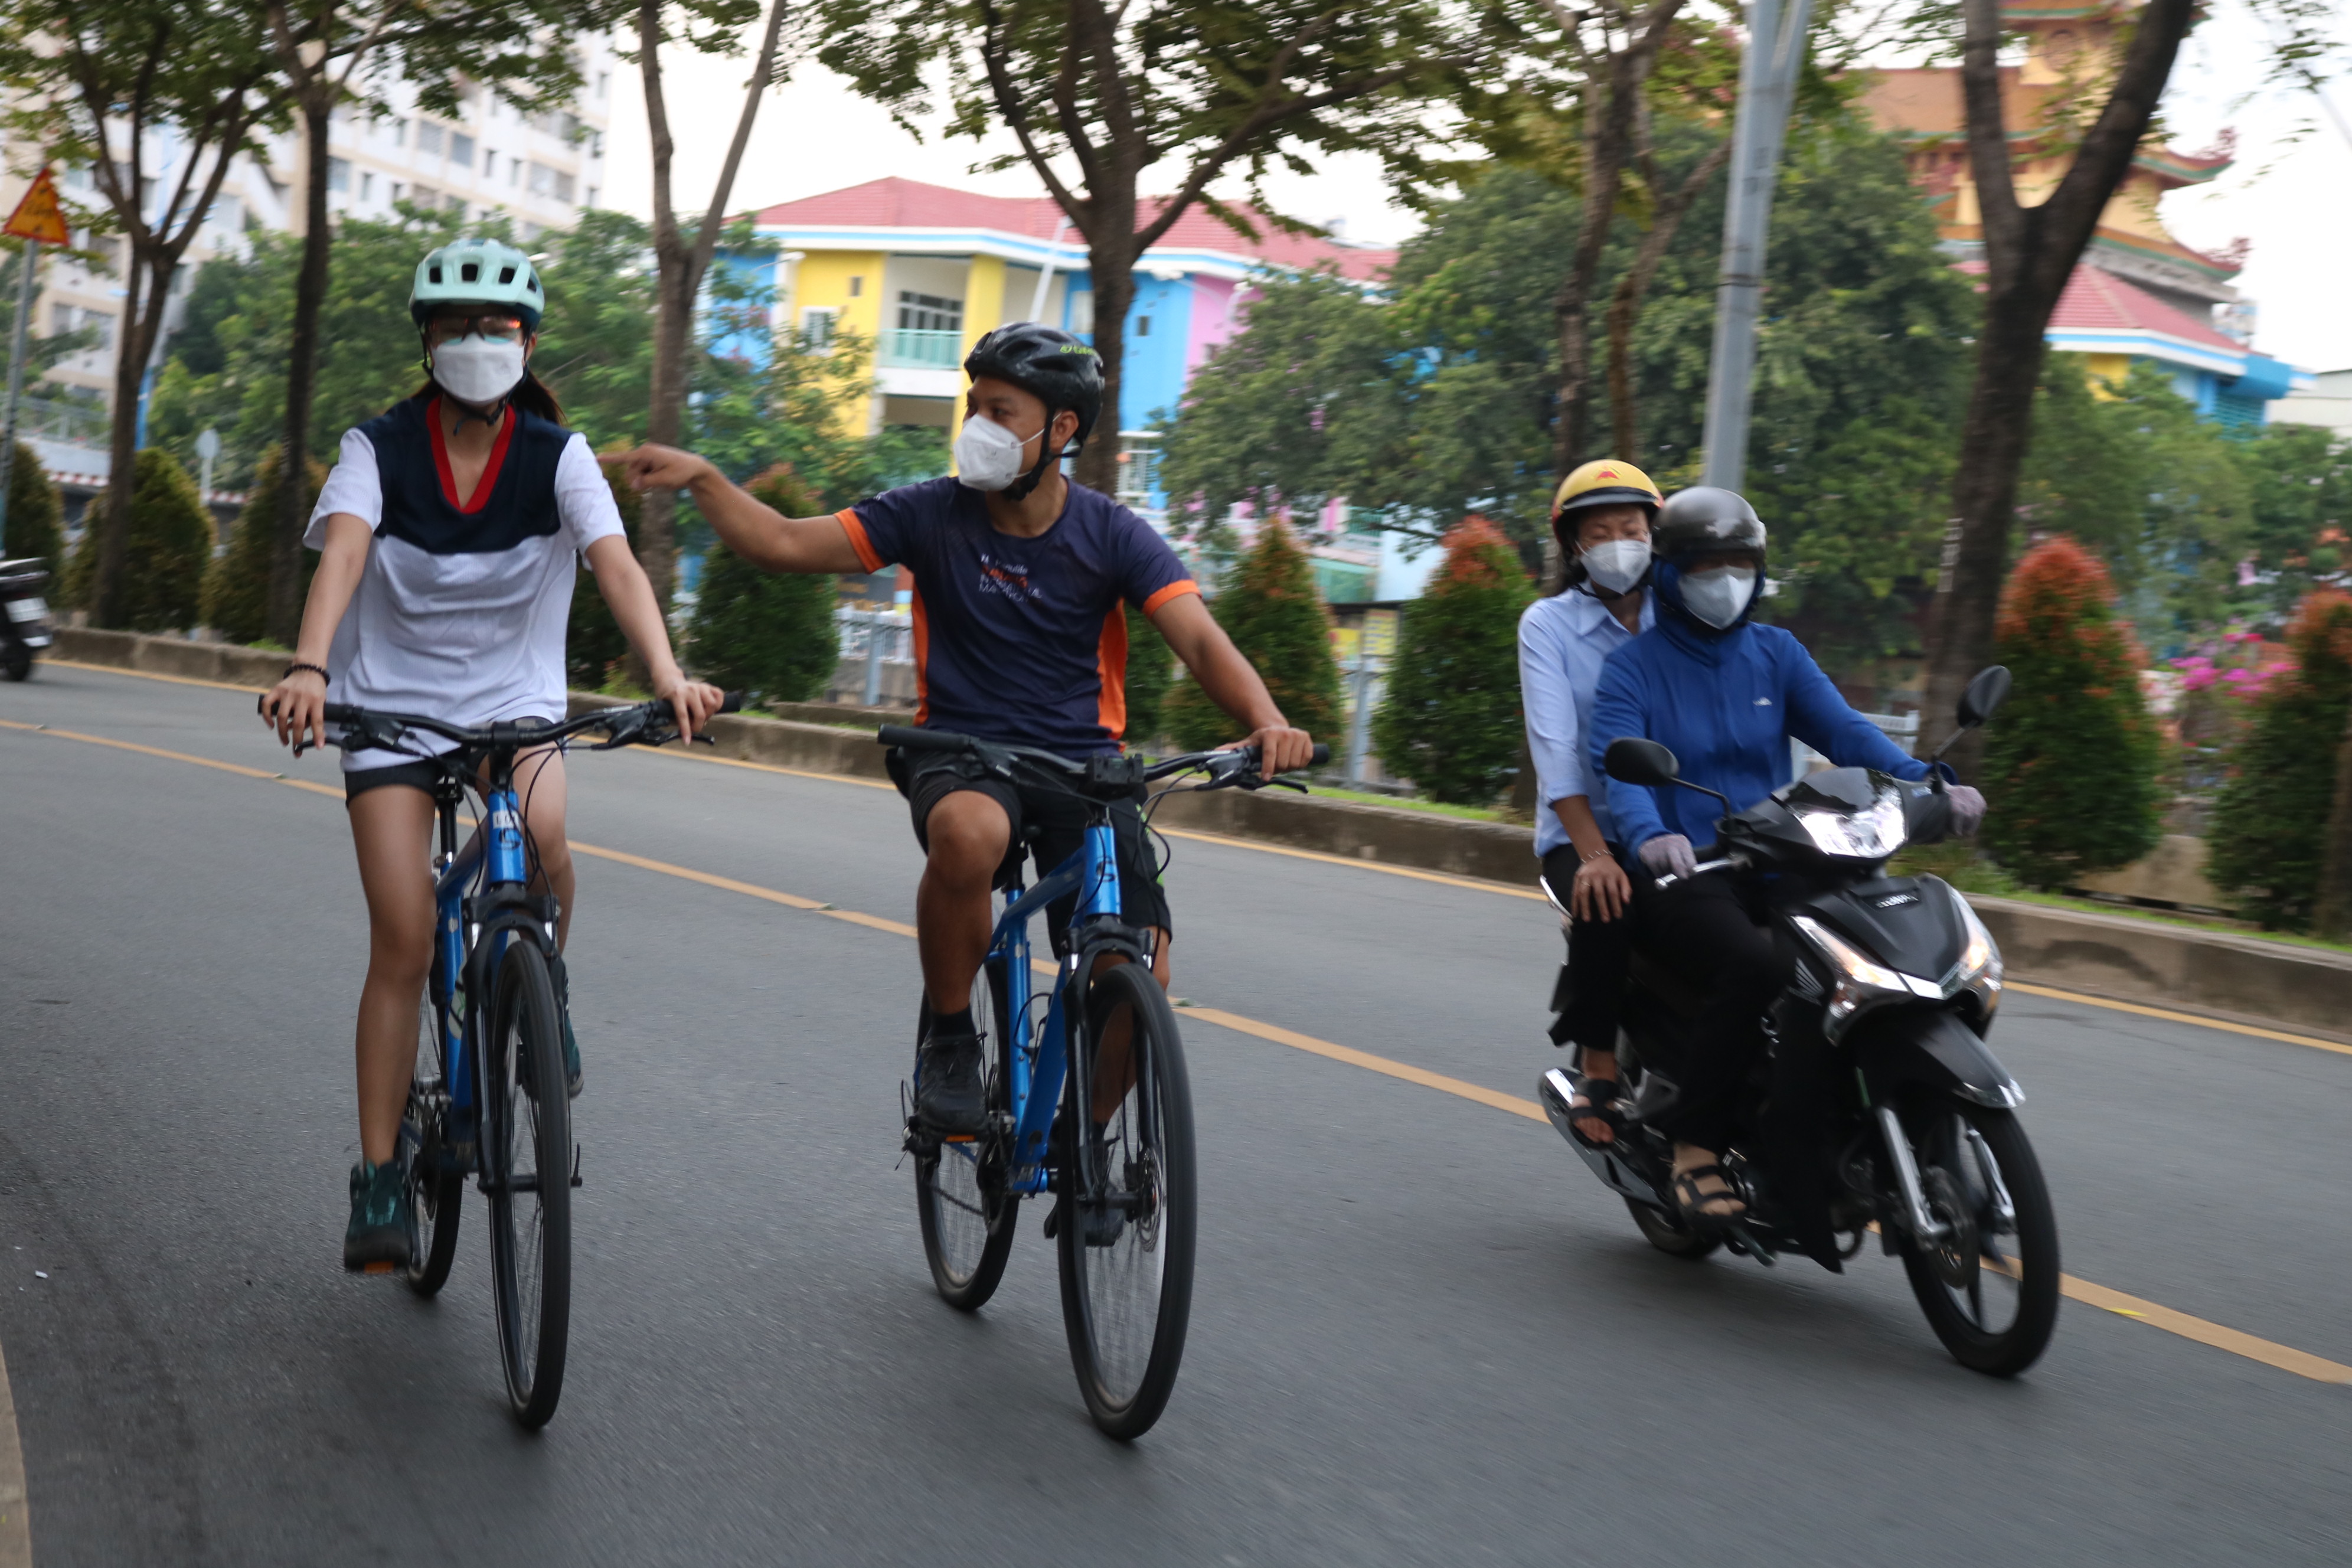 Minh Thuy (right) and Vo Hoang, two regular customers at Cao Cao Adventures, cycle along Truong Sa Street in District 1 in Ho Chi Minh City on November 3, 2021. Photo: Hoang An / Tuoi Tre News